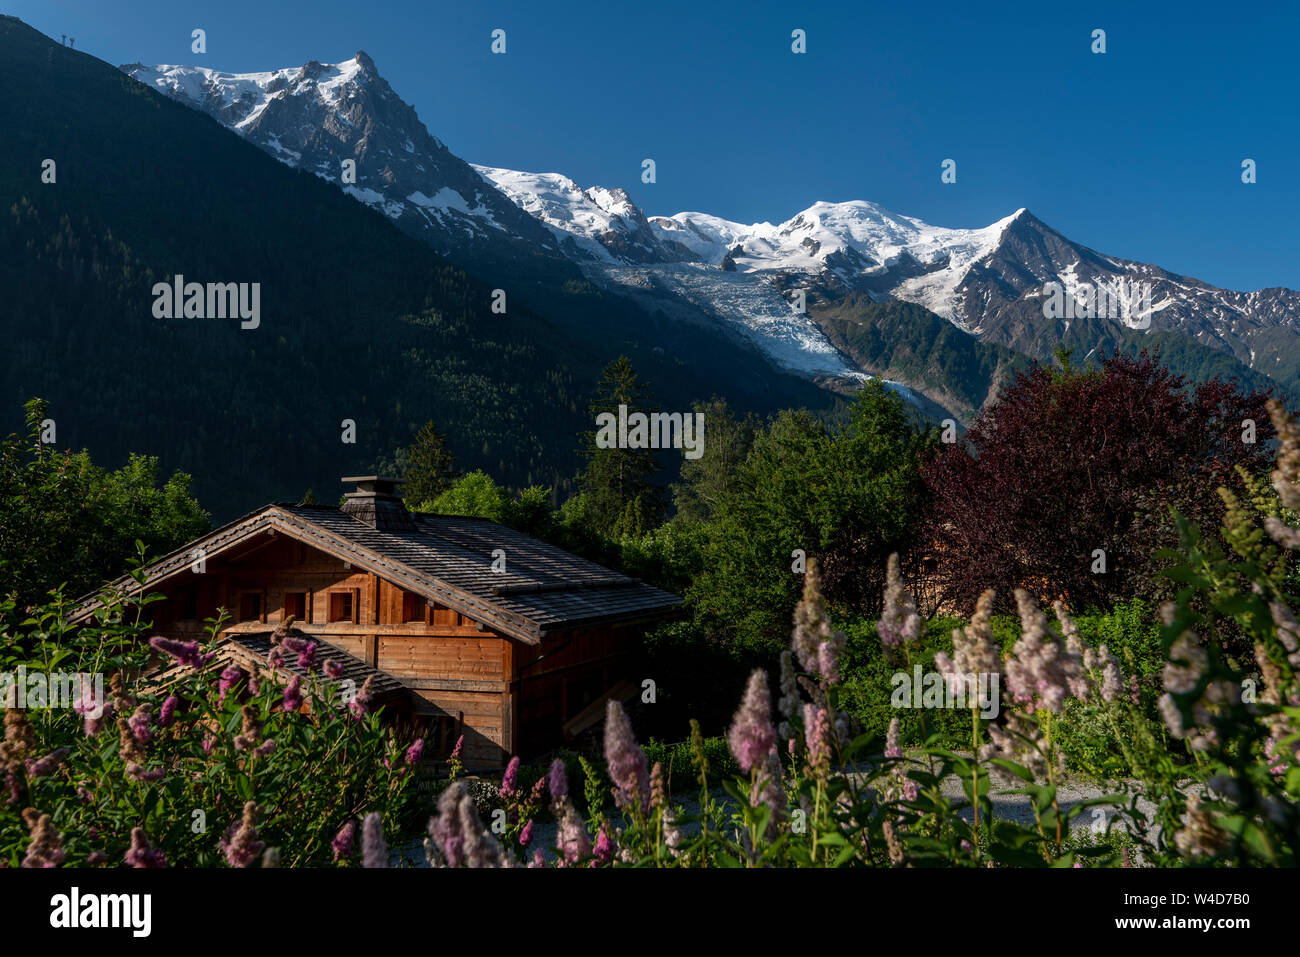 A Wooden Chalet In The French Alps; Chamonix-Mont-Blanc Rhone-Alpes France Stock Photo